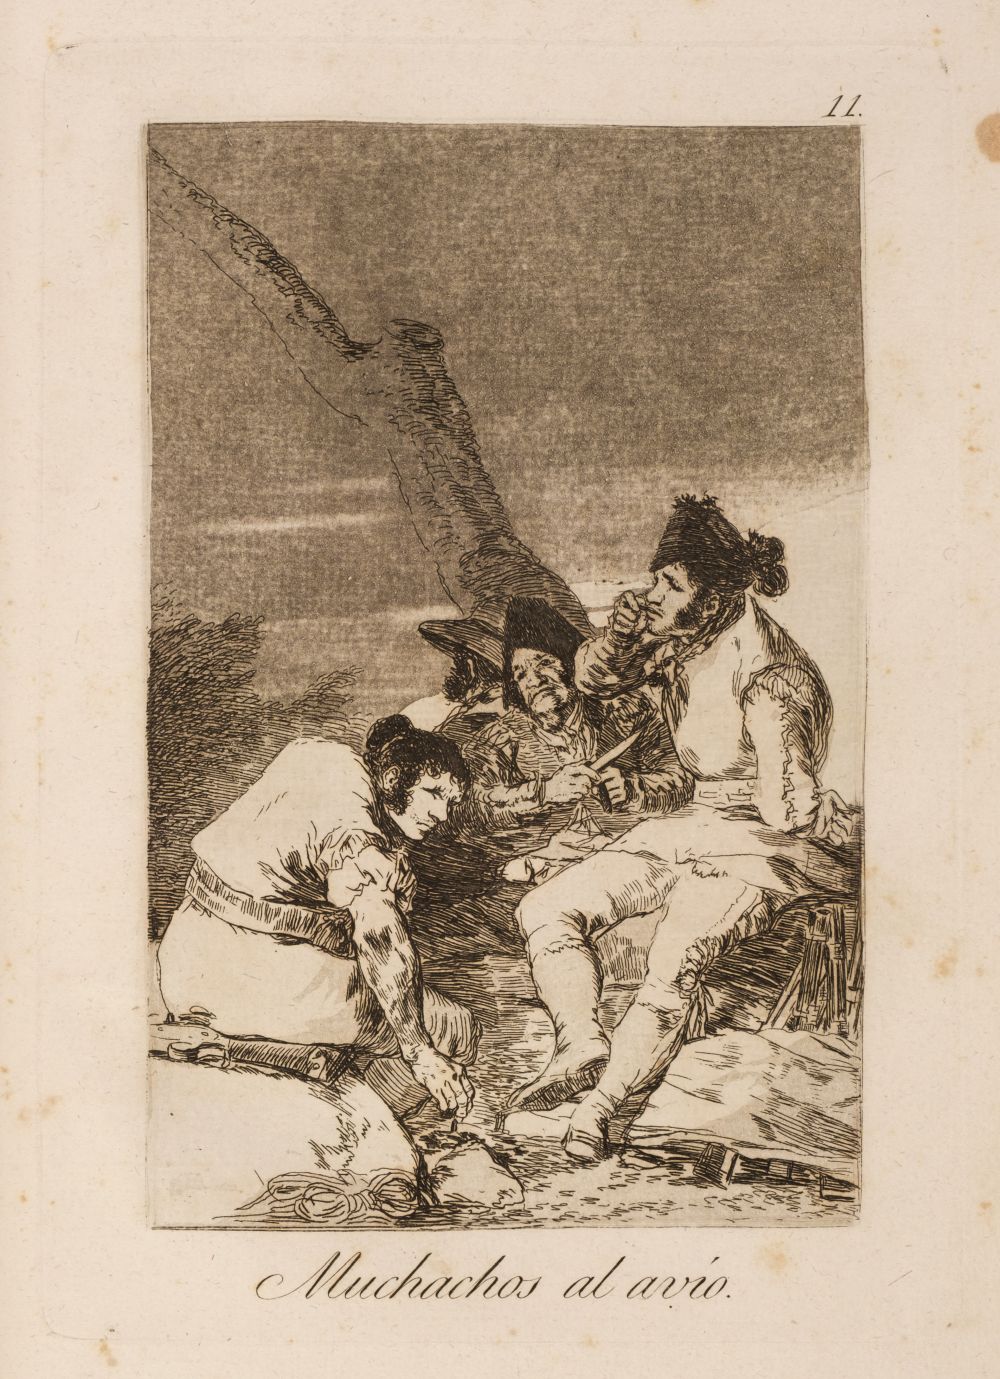 Goya (Francisco de, 1746-1828) Los Caprichos, 1799, the complete set of 80 etchings, FIRST EDITION - Image 11 of 37